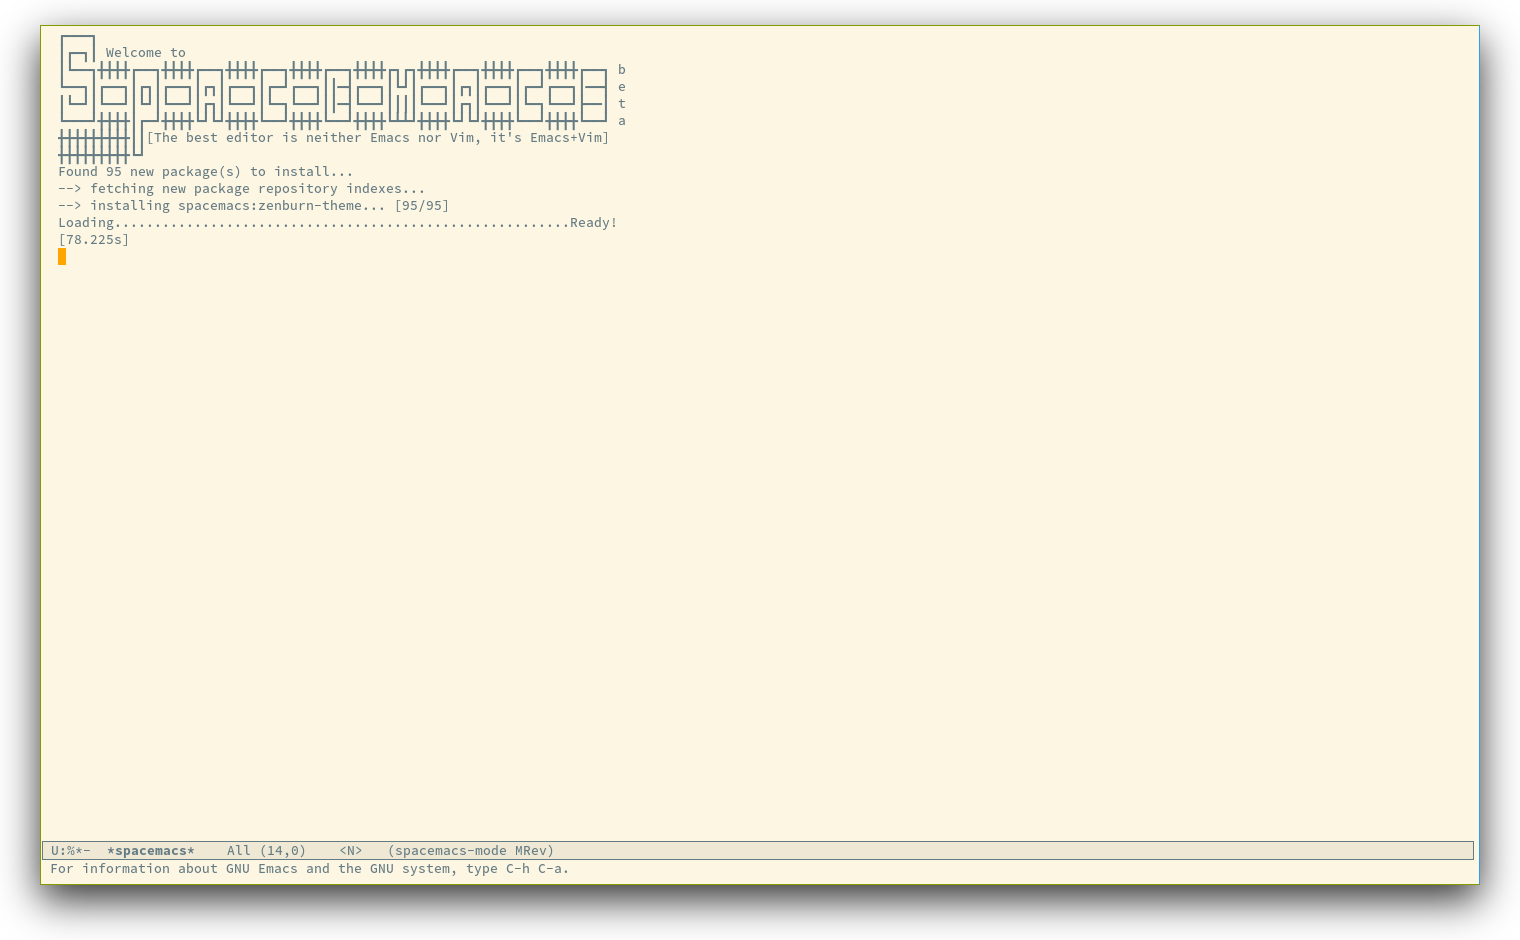 /TakeV/spacemacs/media/commit/5d04465c6968303eb3699a4a78a8536839f66014/doc/img/spacemacs-startup.png